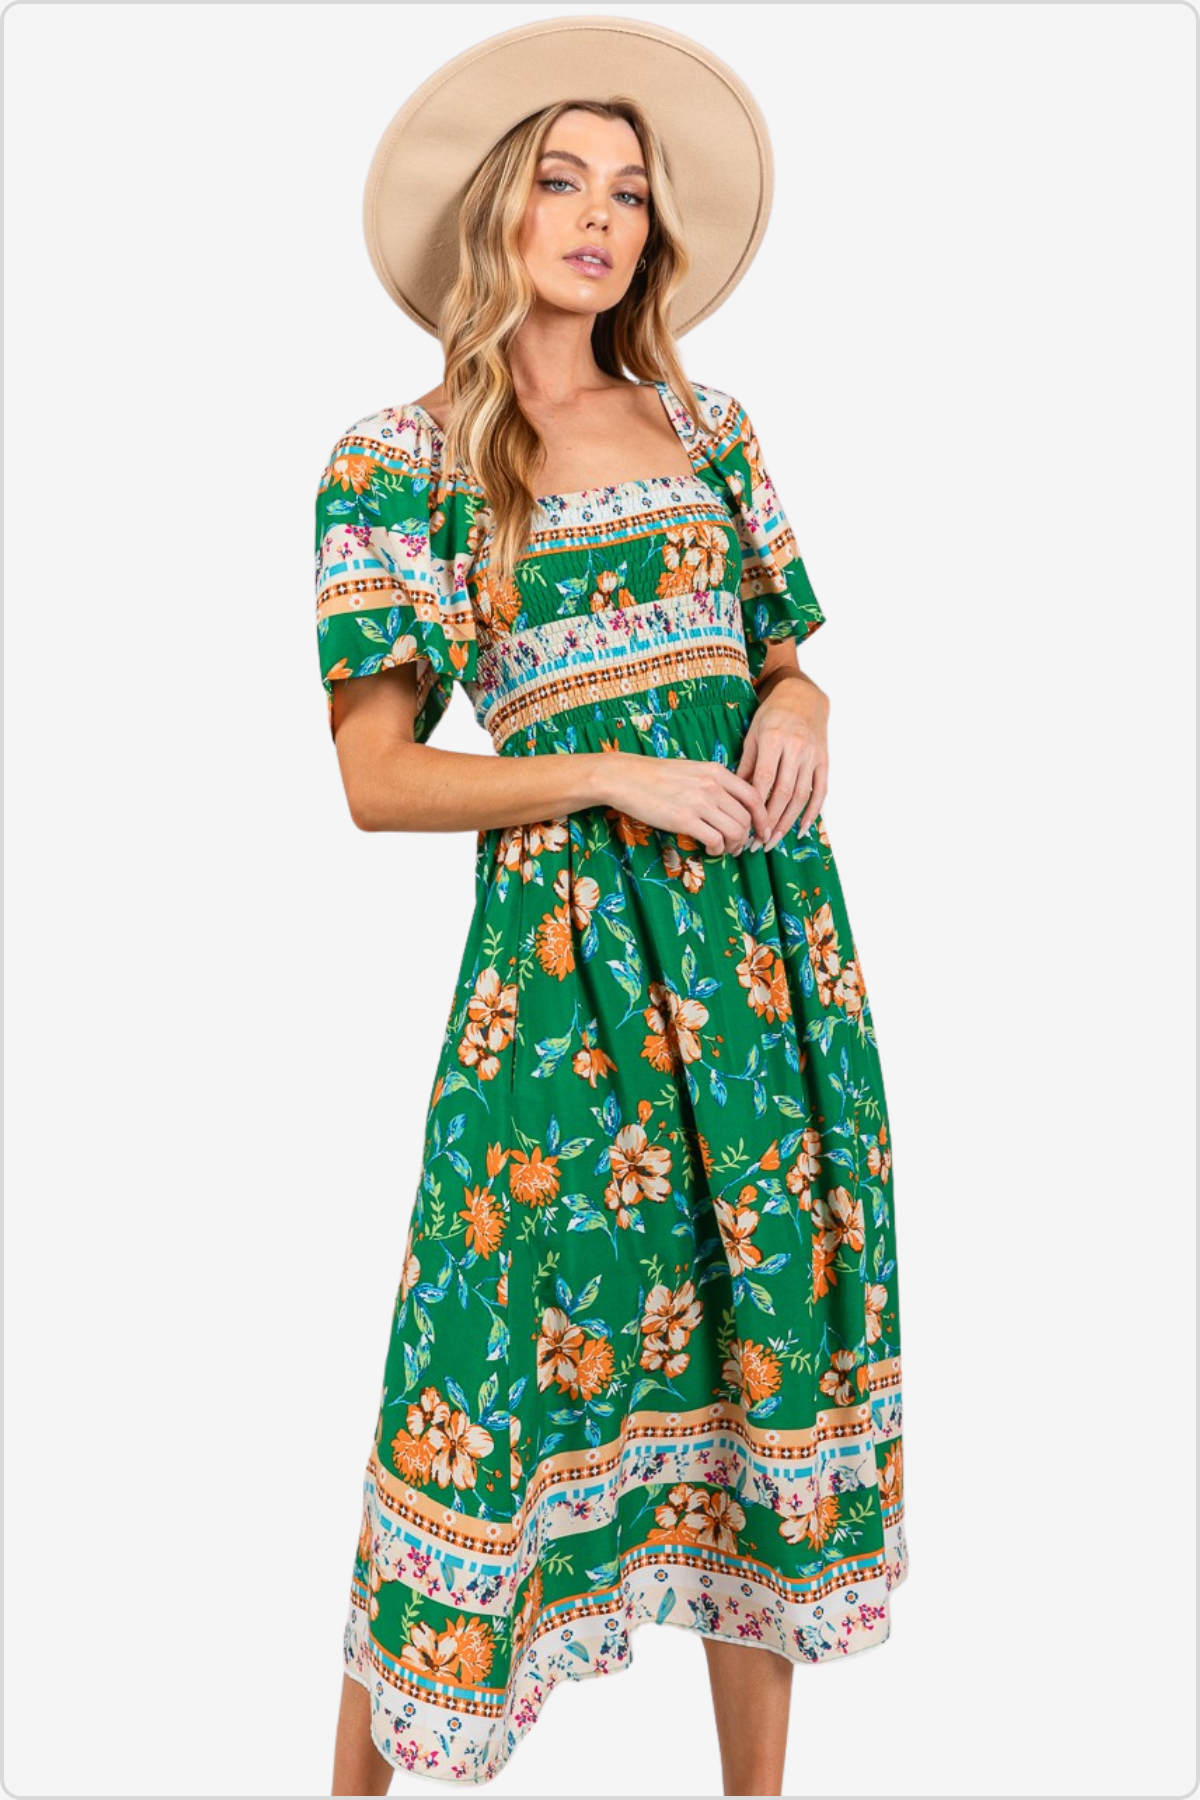 Stylish woman in a green floral print maxi dress with puff sleeves and a beige sun hat, ideal for a summer day or tropical getaway.